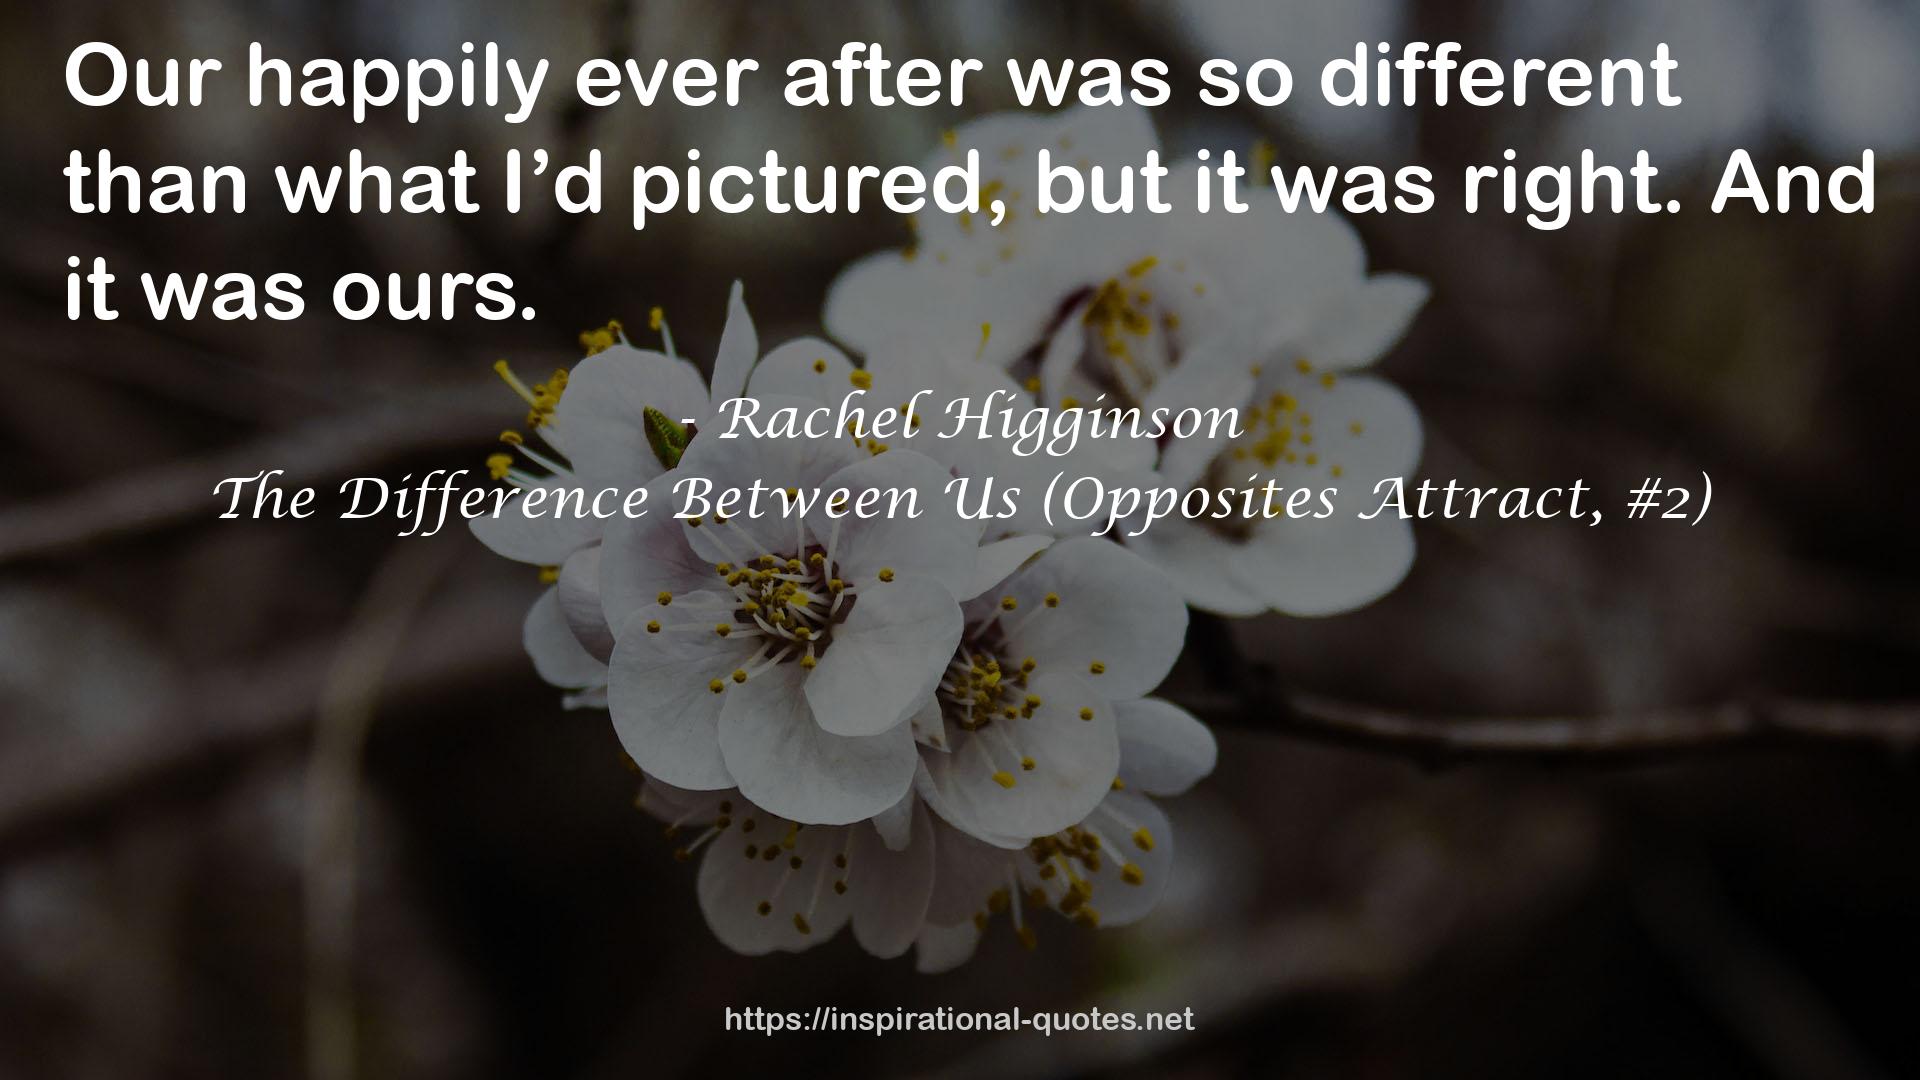 The Difference Between Us (Opposites Attract, #2) QUOTES